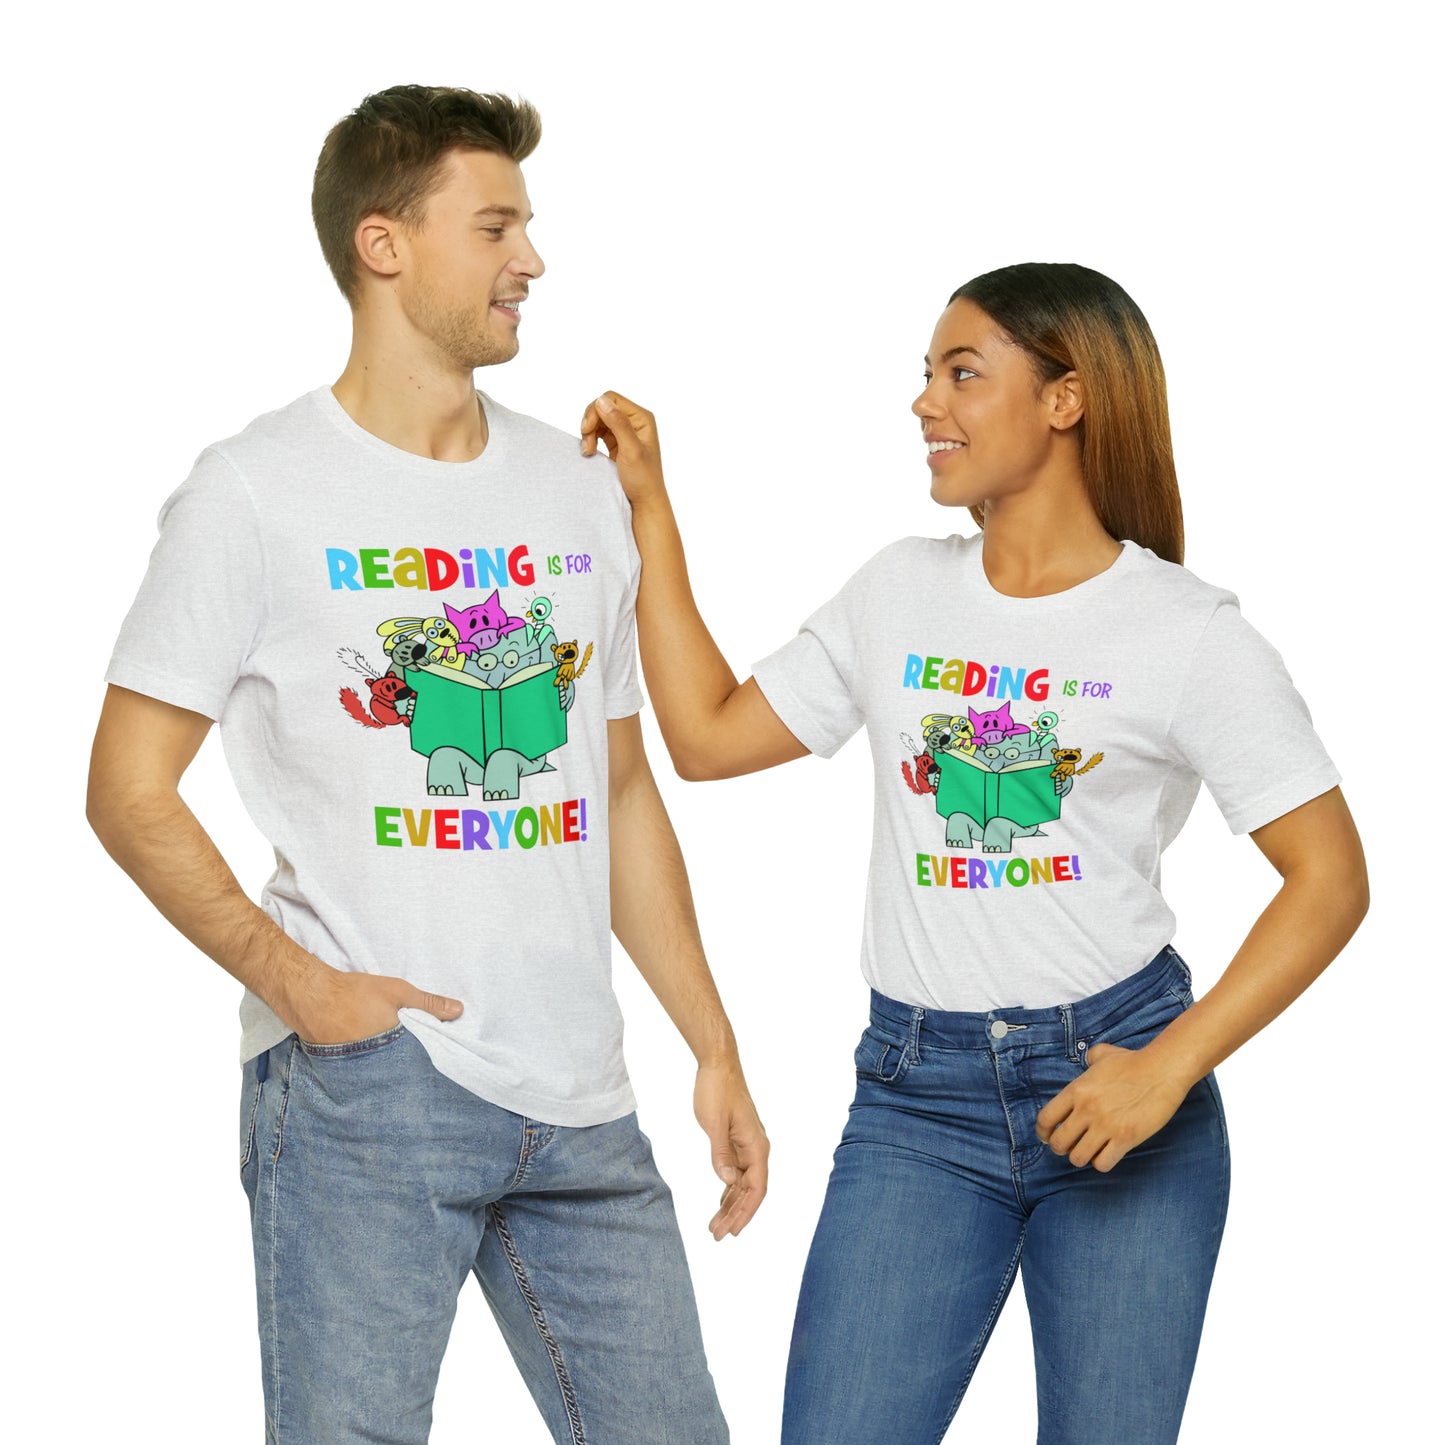 Reading is for everyone" Unisex Jersey Short Sleeve Tee